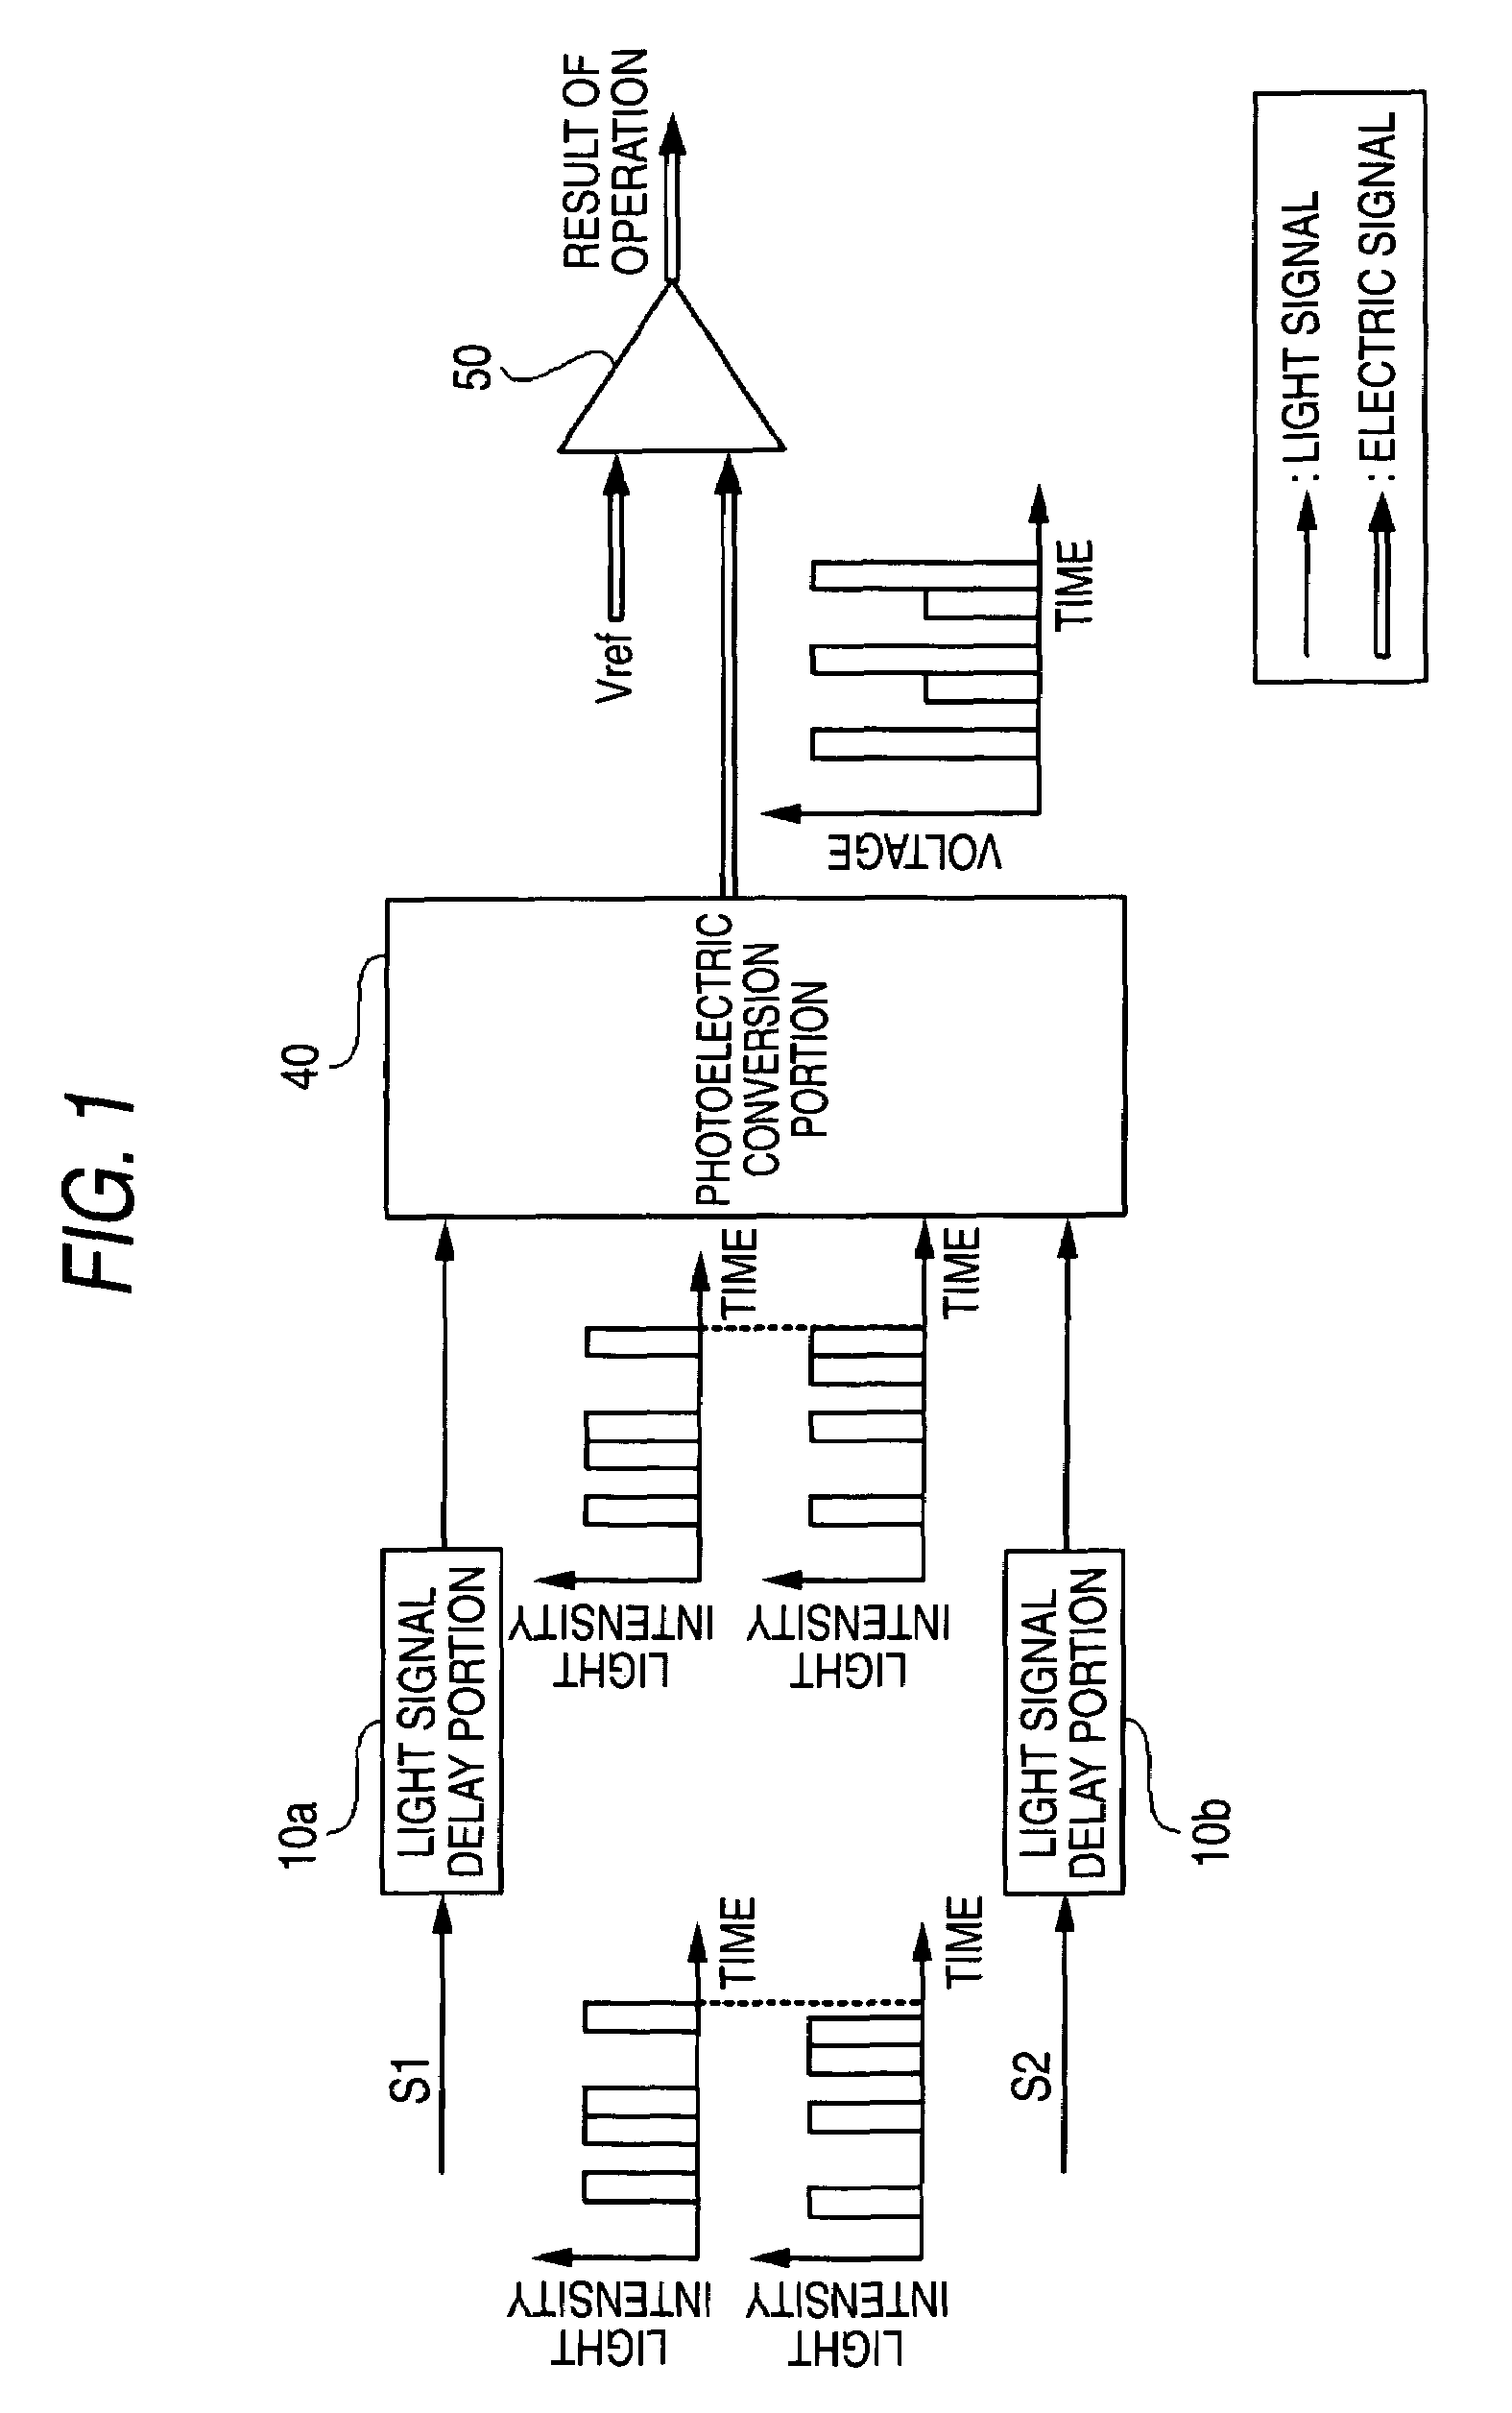 Optical logic device responsive to pulsed signals